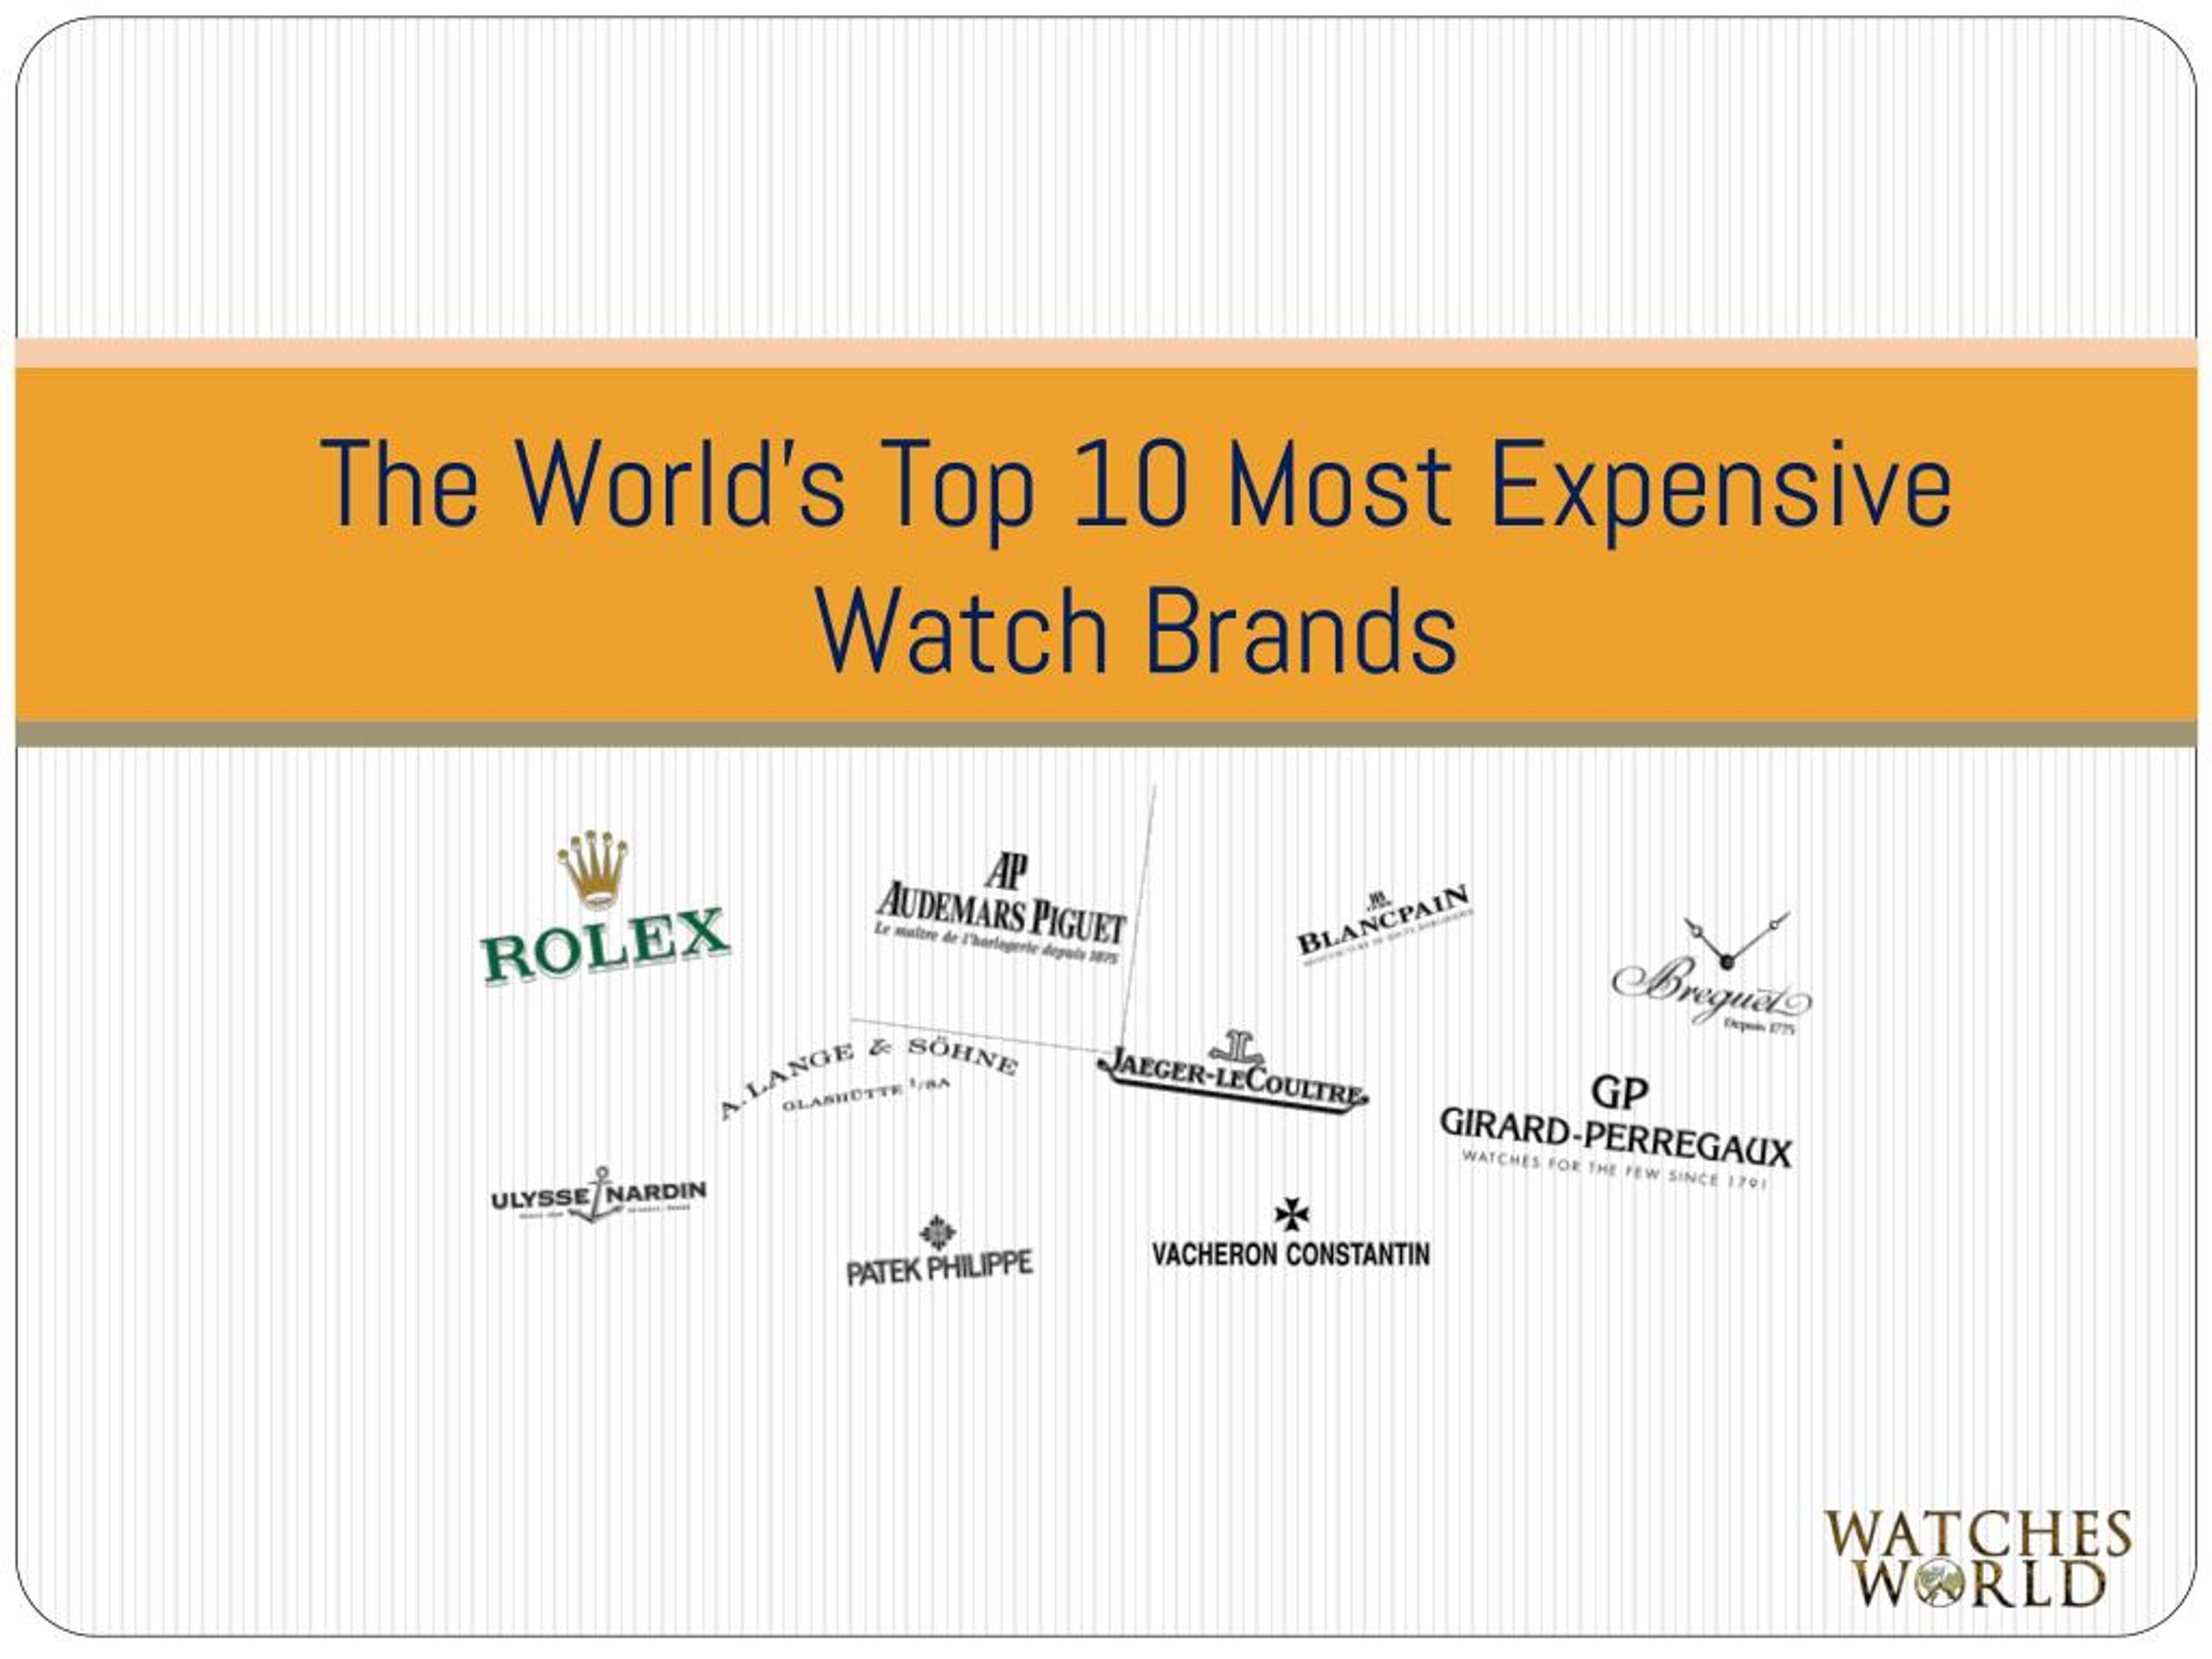 PPT - The World's Top Most Expensive Watch Brands PowerPoint